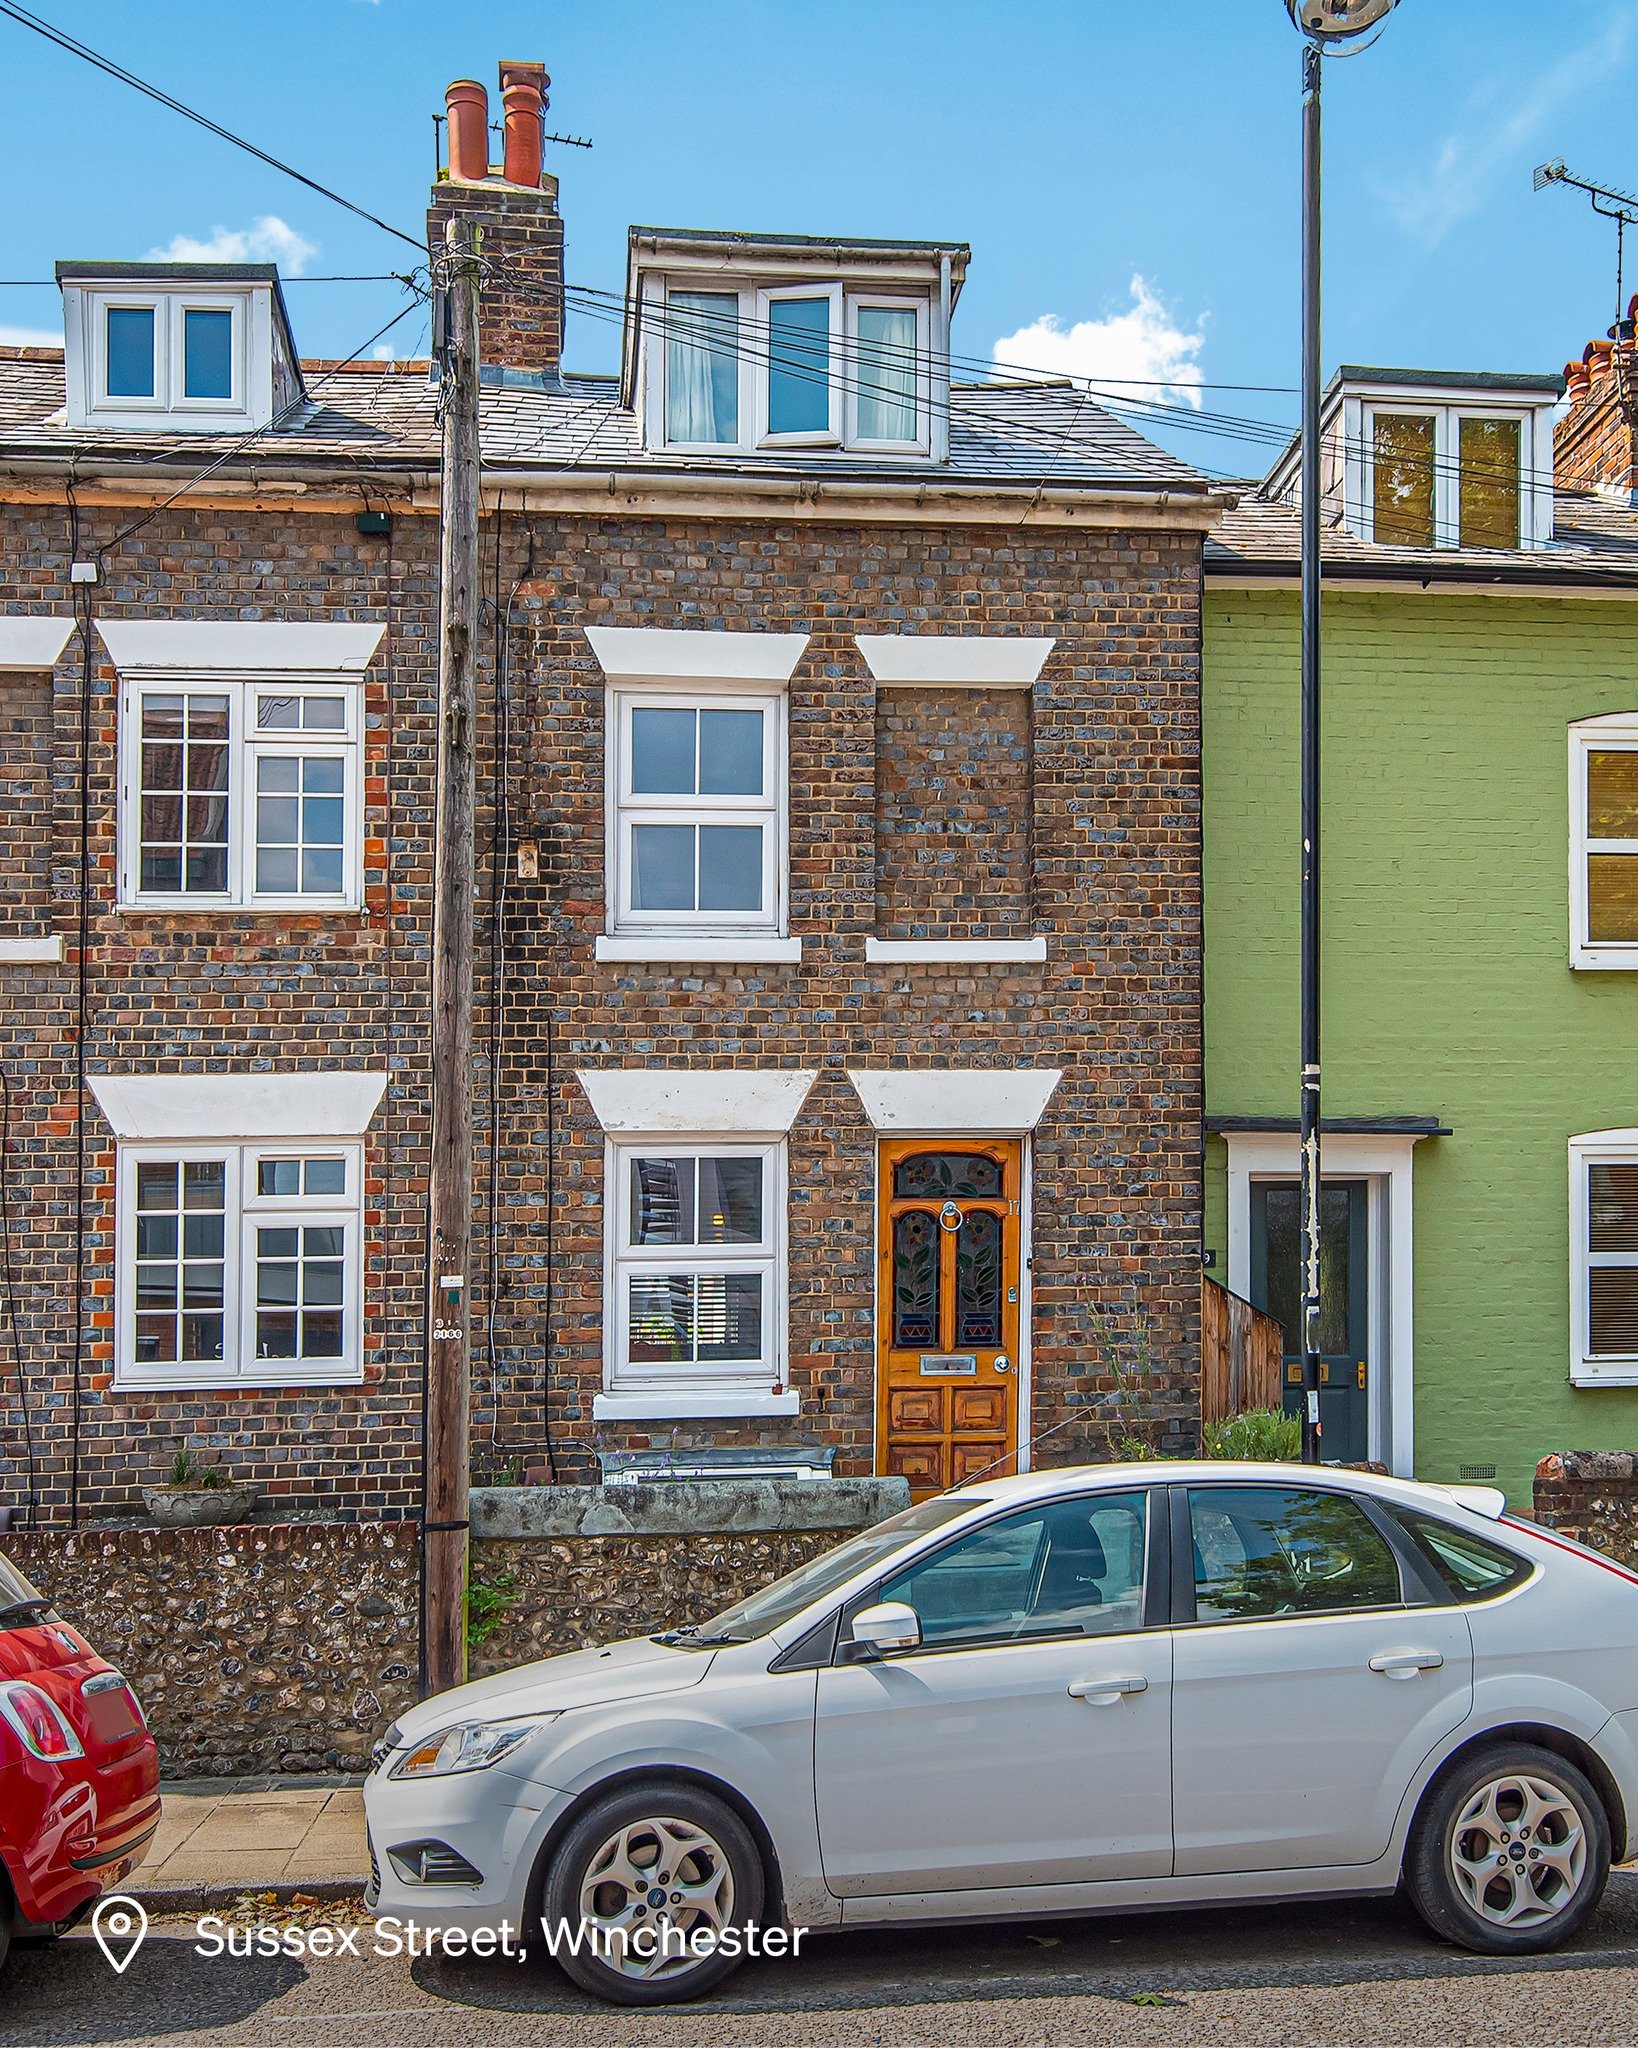 #ForSale This spacious two bedroom terraced home boasts a prime central location and is full of original features, charm and character.

📍 Sussex Street
💷 &pound;450,000 
🛏 2 Bedrooms
🛁 1 Bathroom
🏡 Terraced
✨ Character Property
🅿️ Permit Parki